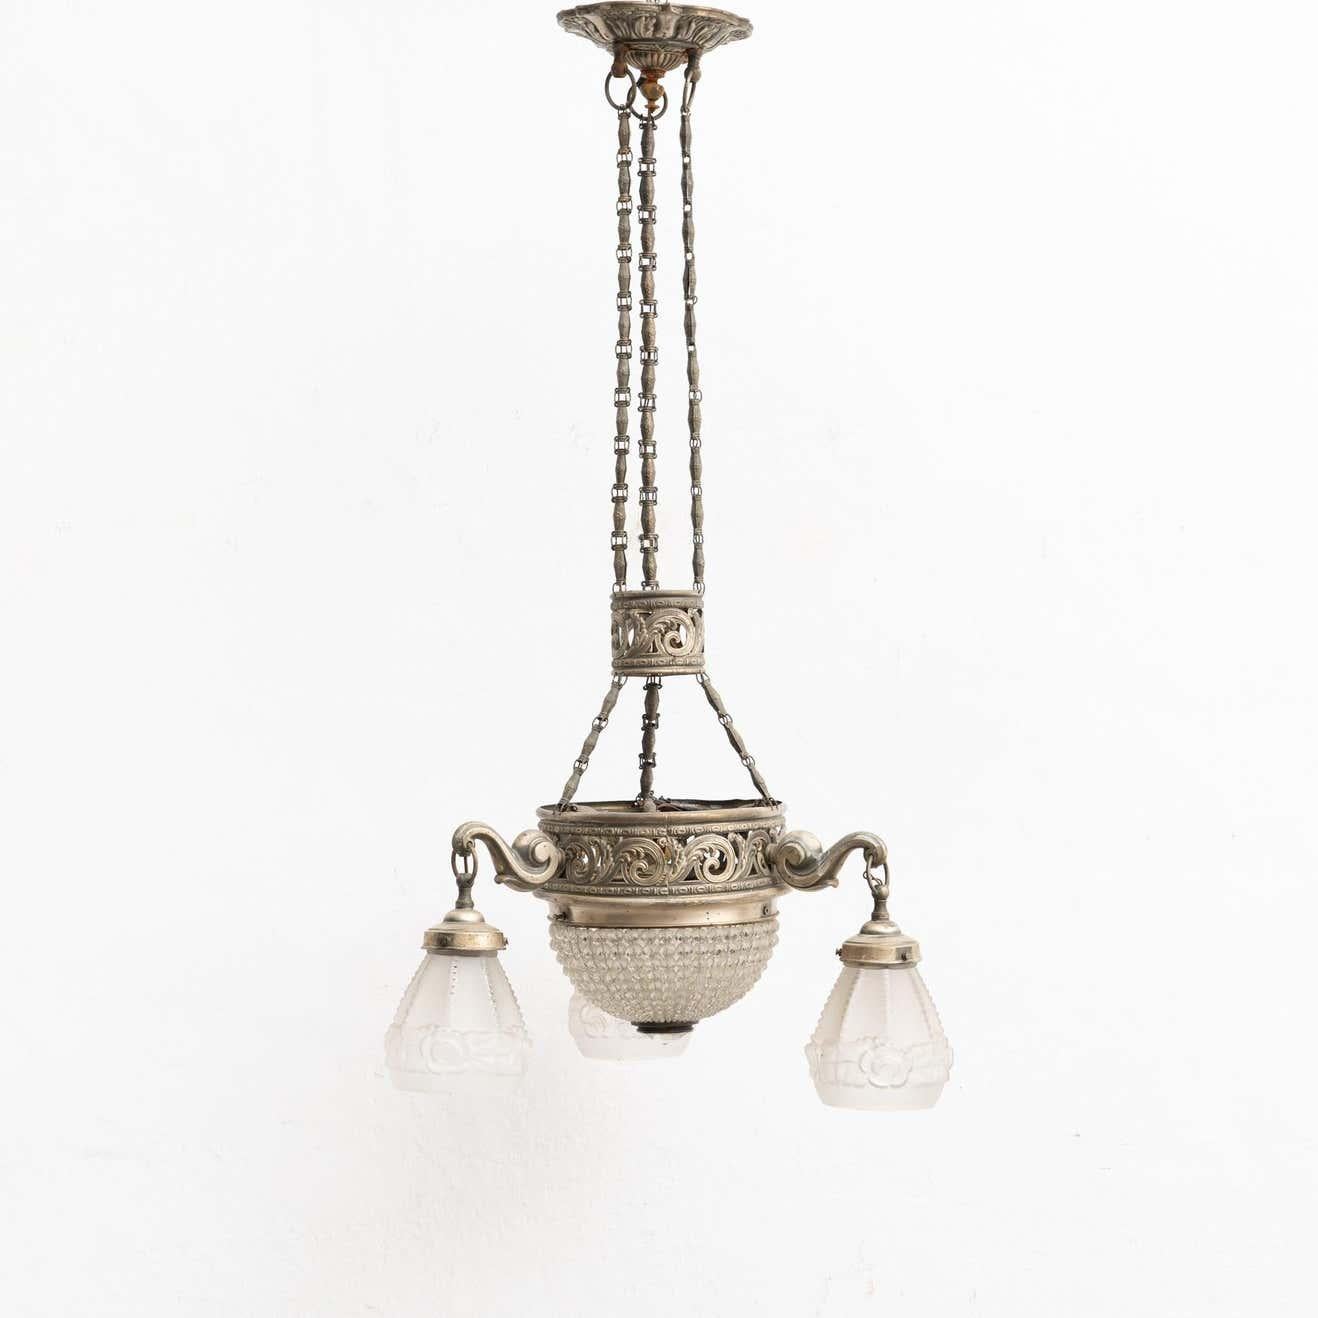 Vintage French Metal and Glass Art Deco Ceiling Lamp, circa 1930 For Sale 3